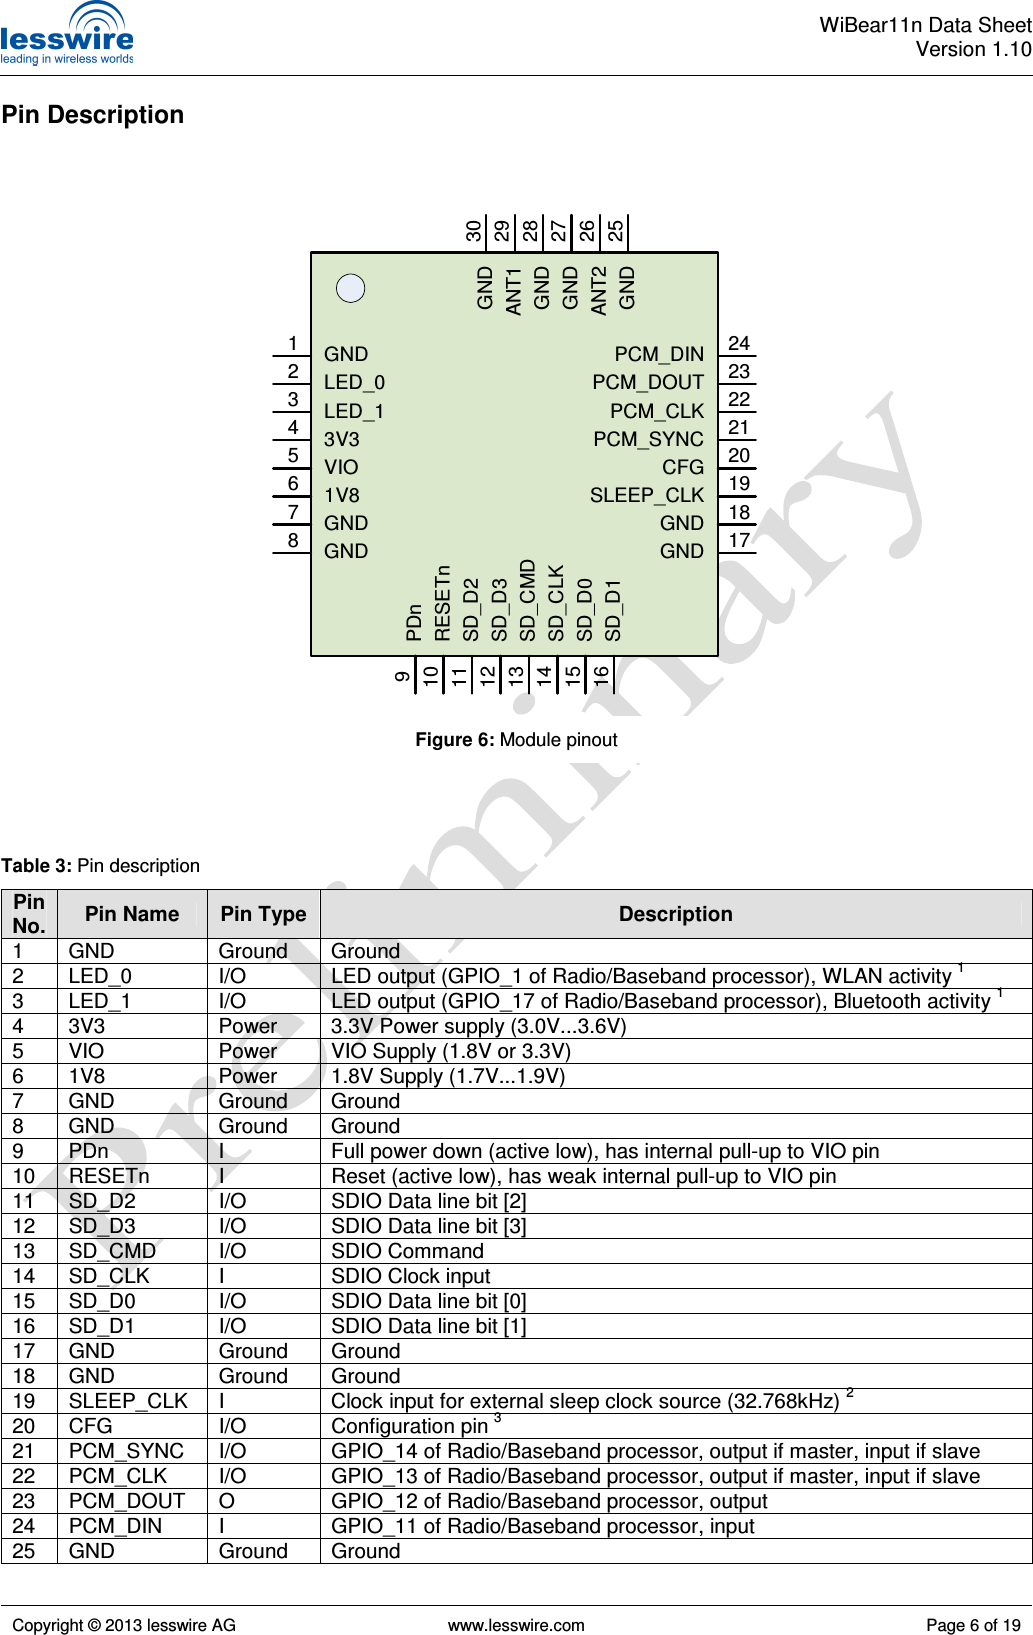  WiBear11n Data SheetVersion 1.10   Copyright © 2013 lesswire AG   www.lesswire.com  Page 6 of 19  Pin Description                                Table 3: Pin description Pin No. Pin Name  Pin Type  Description 1  GND  Ground  Ground 2  LED_0  I/O  LED output (GPIO_1 of Radio/Baseband processor), WLAN activity 1 3  LED_1  I/O  LED output (GPIO_17 of Radio/Baseband processor), Bluetooth activity 1 4  3V3  Power  3.3V Power supply (3.0V...3.6V) 5  VIO  Power  VIO Supply (1.8V or 3.3V) 6  1V8  Power  1.8V Supply (1.7V...1.9V) 7  GND  Ground  Ground 8  GND  Ground  Ground 9  PDn  I  Full power down (active low), has internal pull-up to VIO pin 10  RESETn  I  Reset (active low), has weak internal pull-up to VIO pin 11  SD_D2  I/O  SDIO Data line bit [2] 12  SD_D3  I/O  SDIO Data line bit [3] 13  SD_CMD  I/O  SDIO Command 14  SD_CLK  I  SDIO Clock input 15  SD_D0  I/O  SDIO Data line bit [0] 16  SD_D1  I/O  SDIO Data line bit [1] 17  GND  Ground  Ground 18  GND  Ground  Ground 19  SLEEP_CLK  I  Clock input for external sleep clock source (32.768kHz) 2 20  CFG  I/O  Configuration pin 3 21  PCM_SYNC  I/O  GPIO_14 of Radio/Baseband processor, output if master, input if slave 22  PCM_CLK  I/O  GPIO_13 of Radio/Baseband processor, output if master, input if slave 23  PCM_DOUT  O  GPIO_12 of Radio/Baseband processor, output 24  PCM_DIN  I  GPIO_11 of Radio/Baseband processor, input 25  GND  Ground  Ground GNDLED_0LED_13V3VIO1V8GNDGND12345678PDnRESETnSD_D2SD_D3SD_CMDSD_CLKSD_D0SD_D11415161011121392423222120191817GNDGNDSLEEP_CLKCFGPCM_SYNCPCM_CLKPCM_DOUTPCM_DIN302928272625GNDANT2GNDGNDANT1GNDFigure 6: Module pinout 